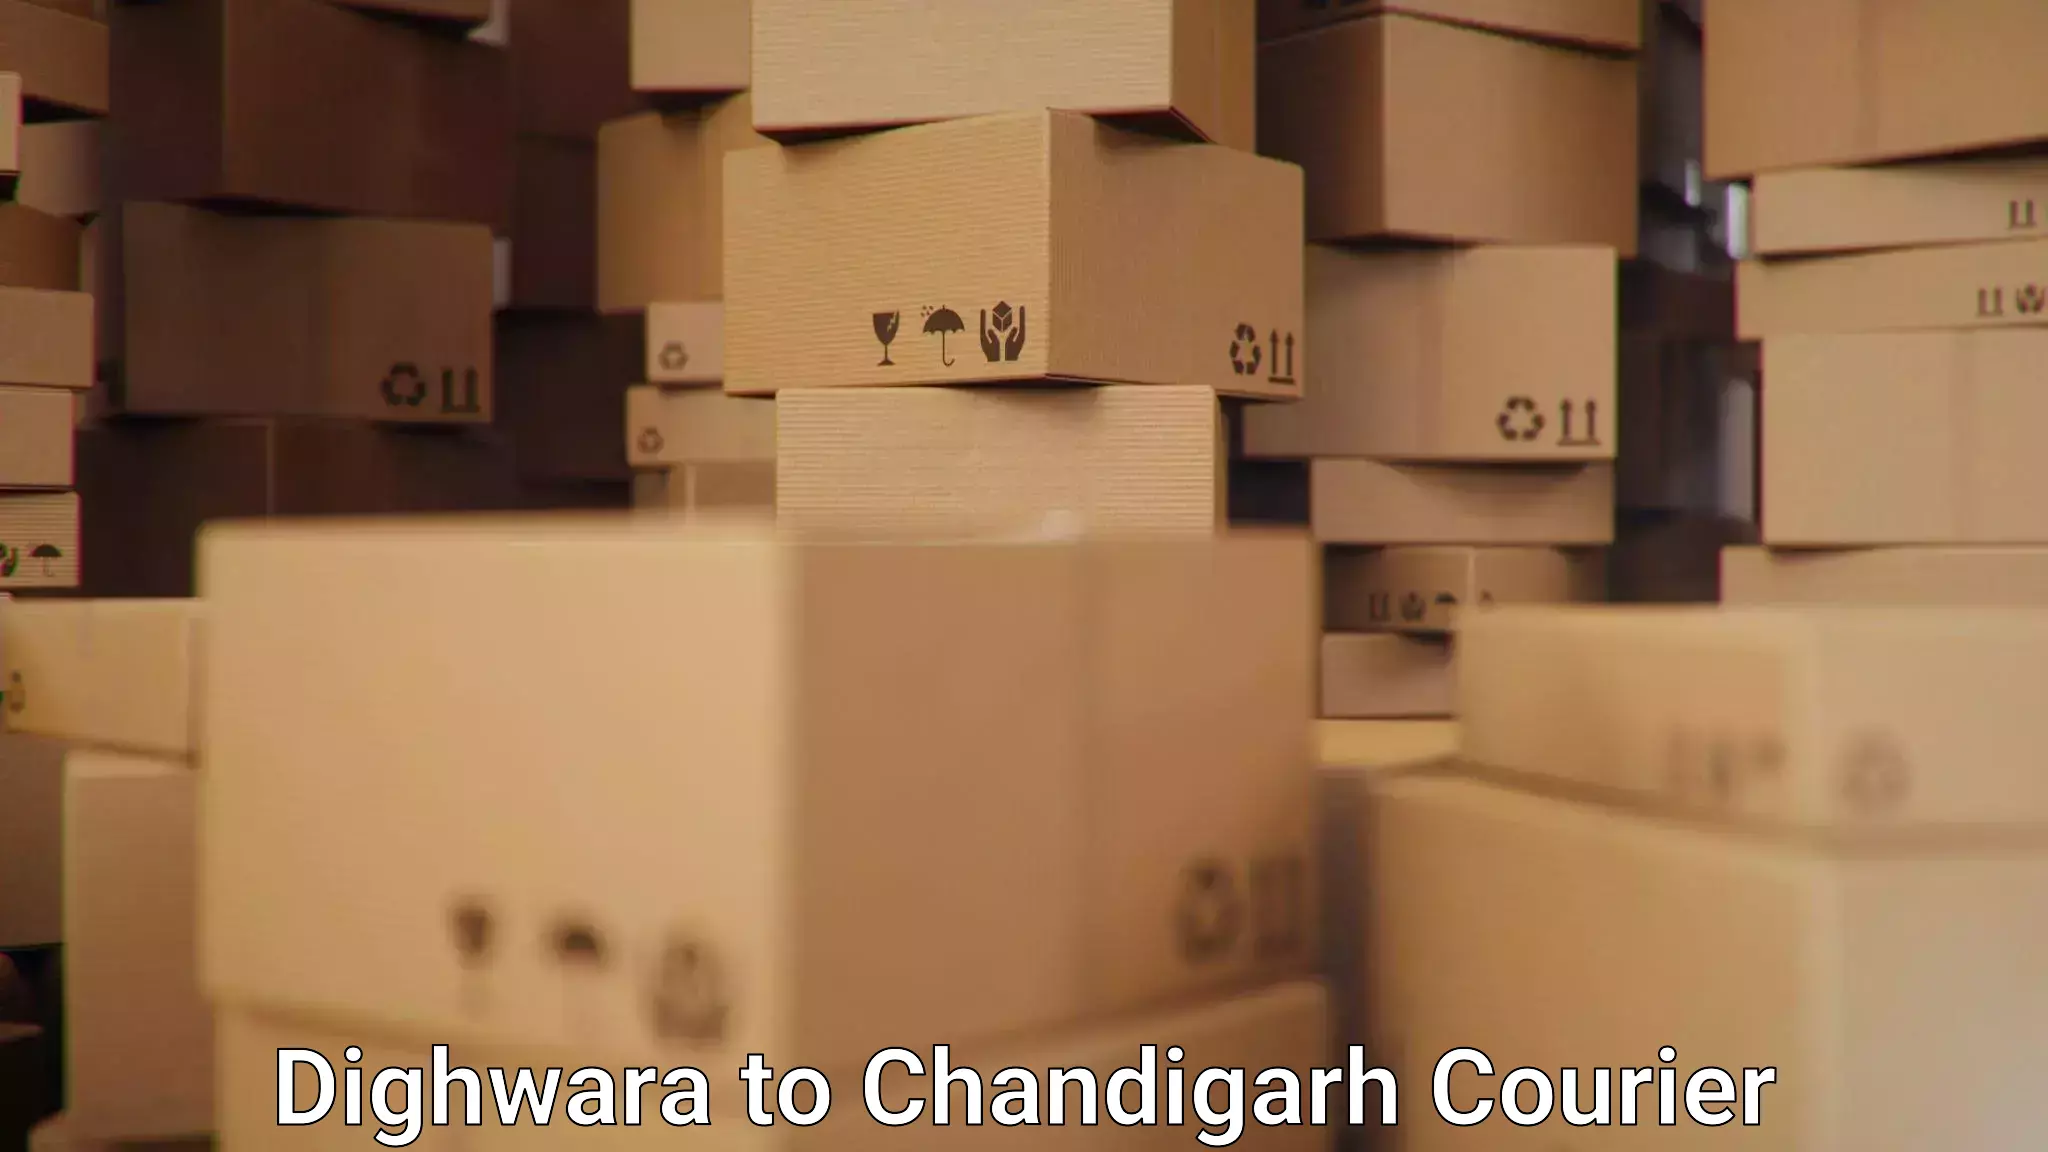 Express delivery network Dighwara to Chandigarh